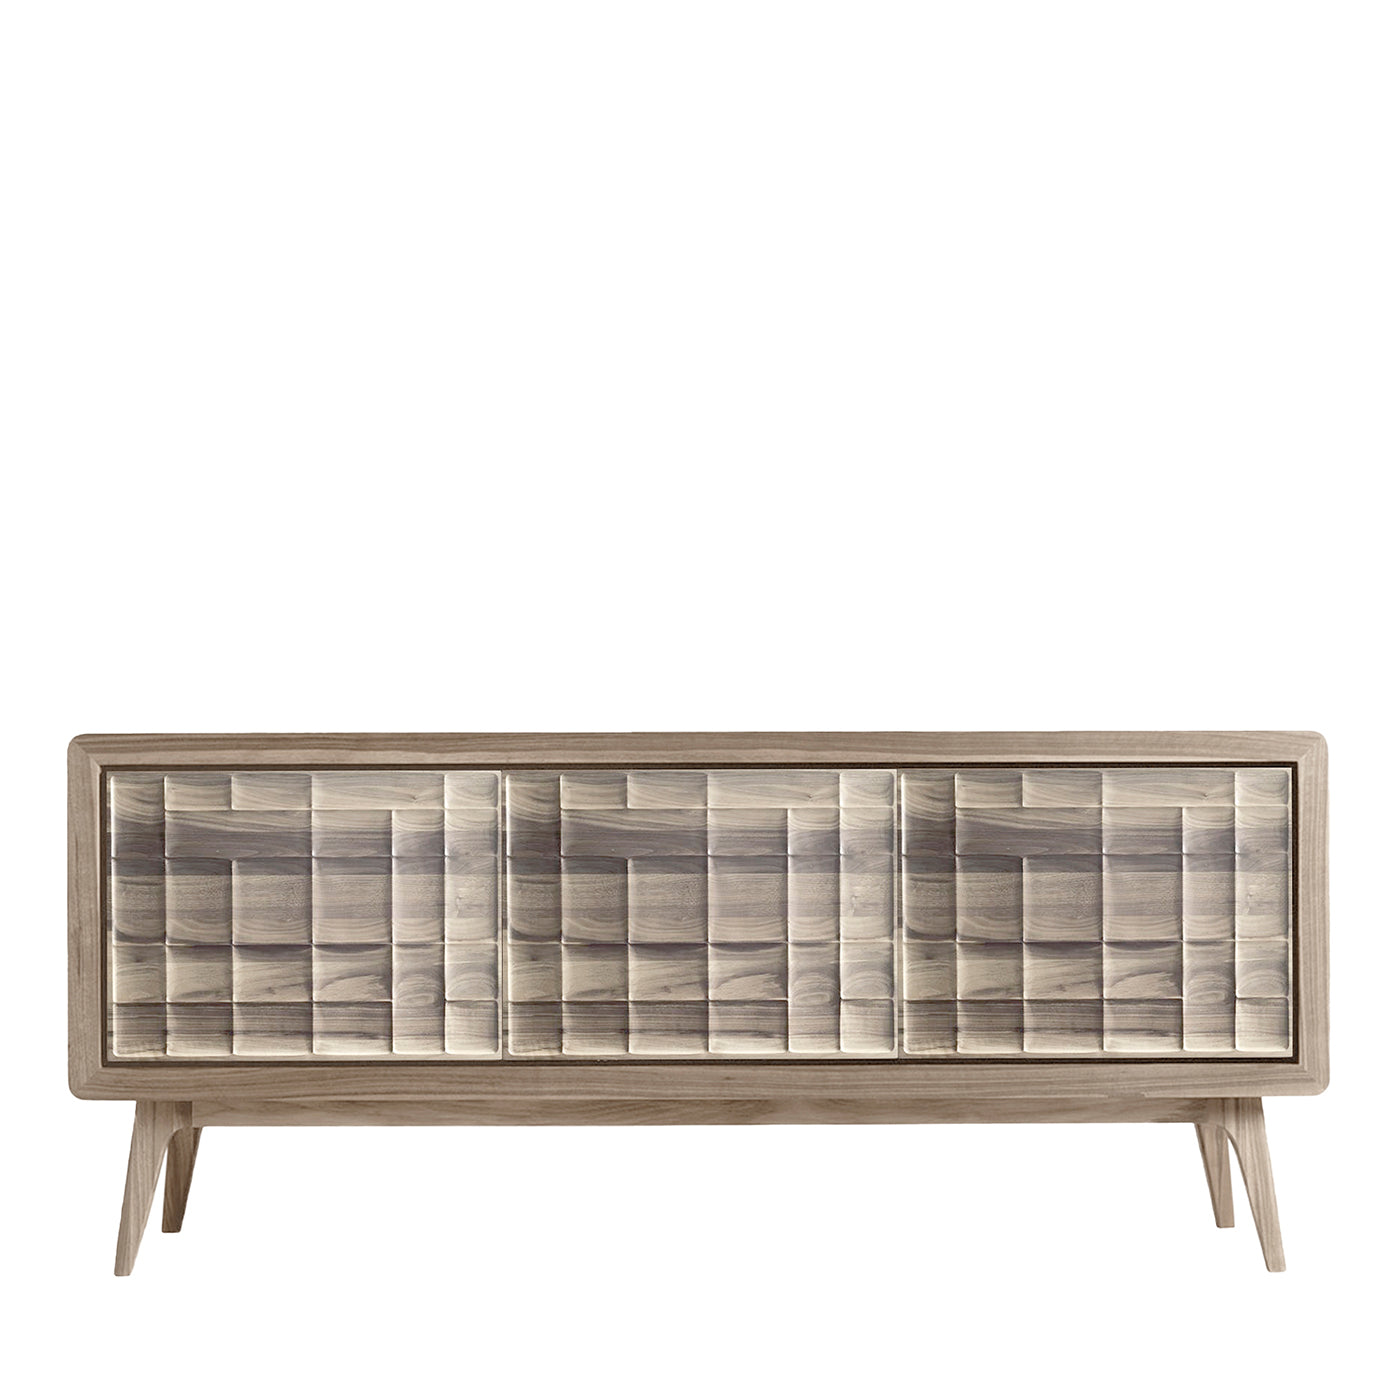 Artes Scacco sideboard #2 - Main view